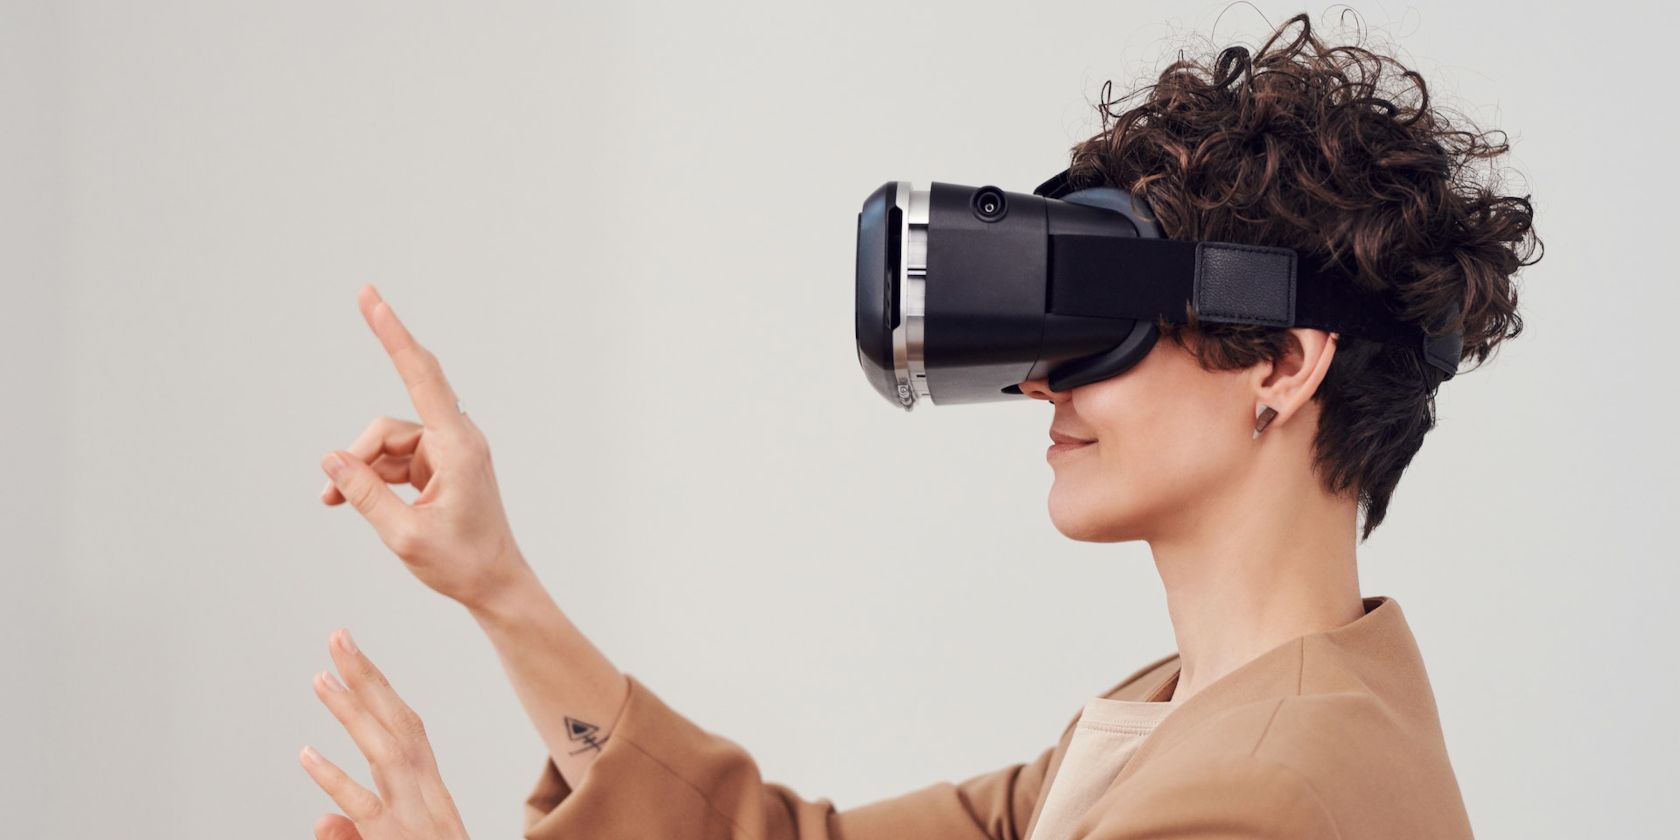 How VR Coaching at Work Can Increase Your Expertise & Confidence